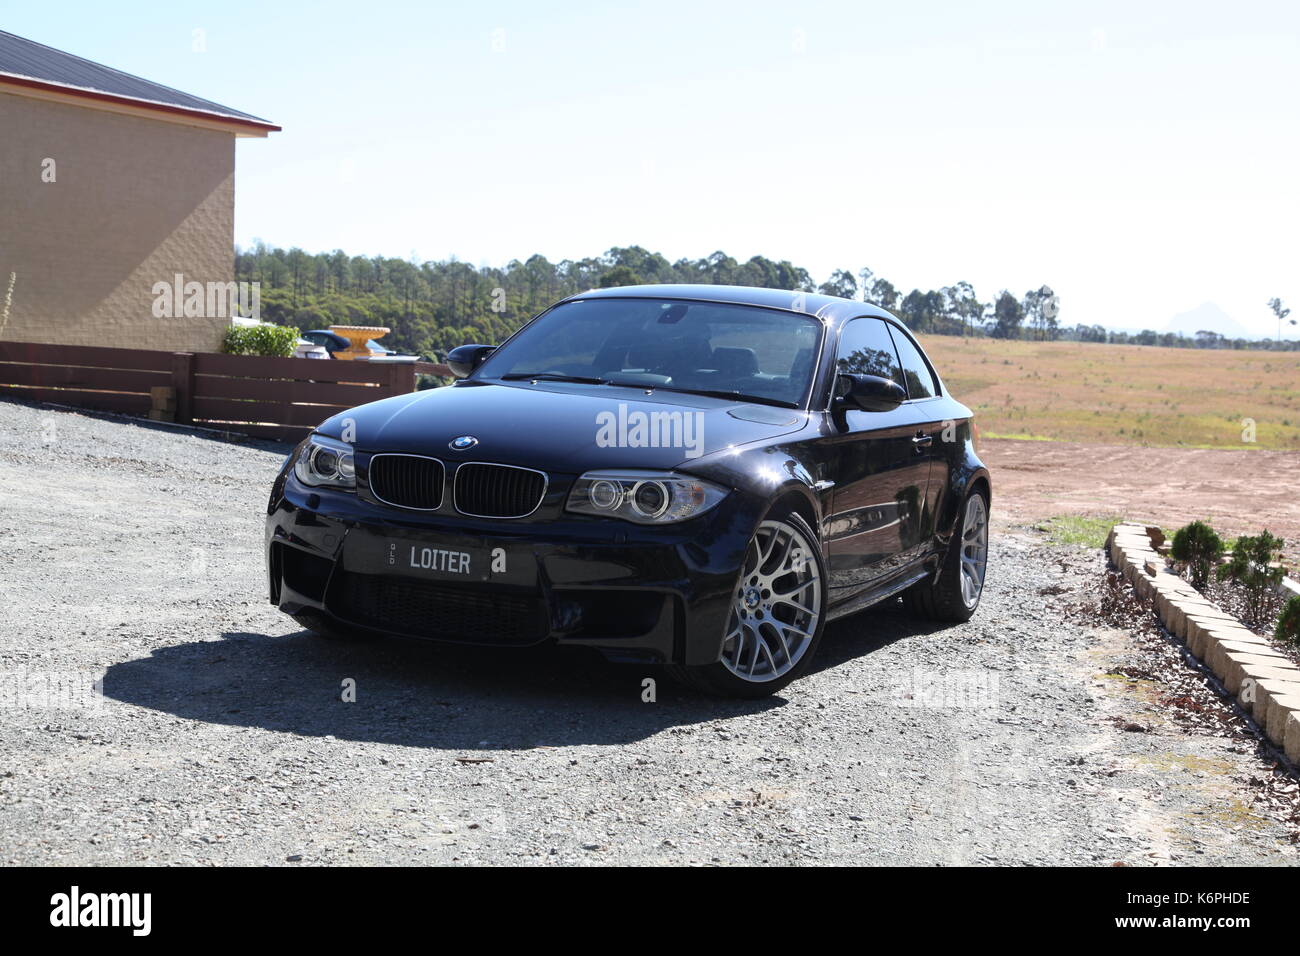 BMW 1M Coupe. Fine sunny day in Queensland. Stock Photo